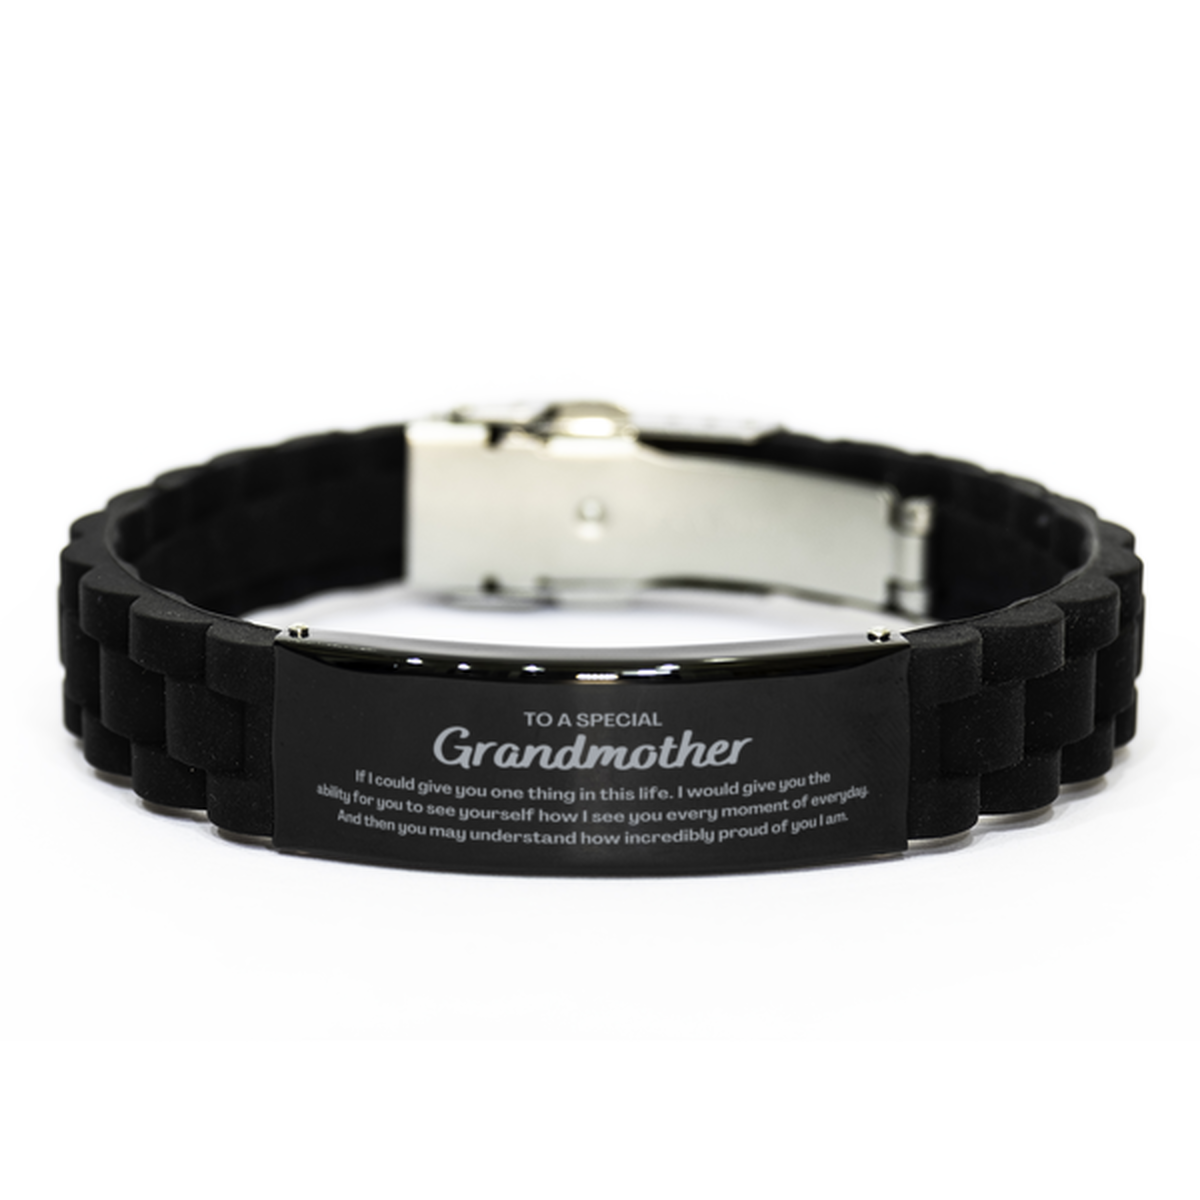 To My Grandmother Black Glidelock Clasp Bracelet, Gifts For Grandmother Engraved, Inspirational Gifts for Christmas Birthday, Epic Gifts for Grandmother To A Special Grandmother how incredibly proud of you I am